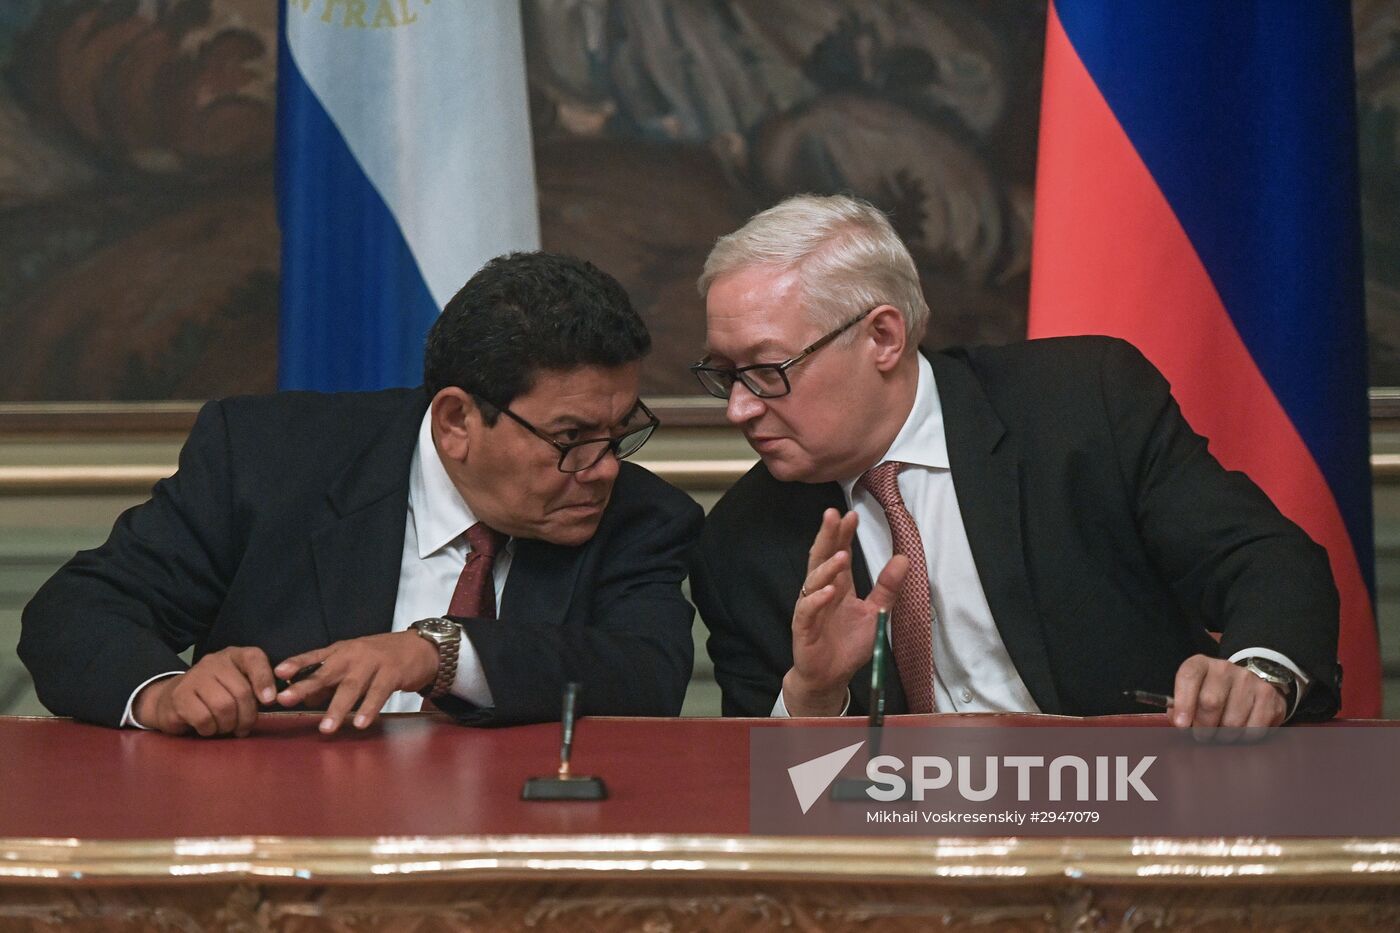 Rusia, Nicaragua sign joint declaration on No first placement of weapons in outer space